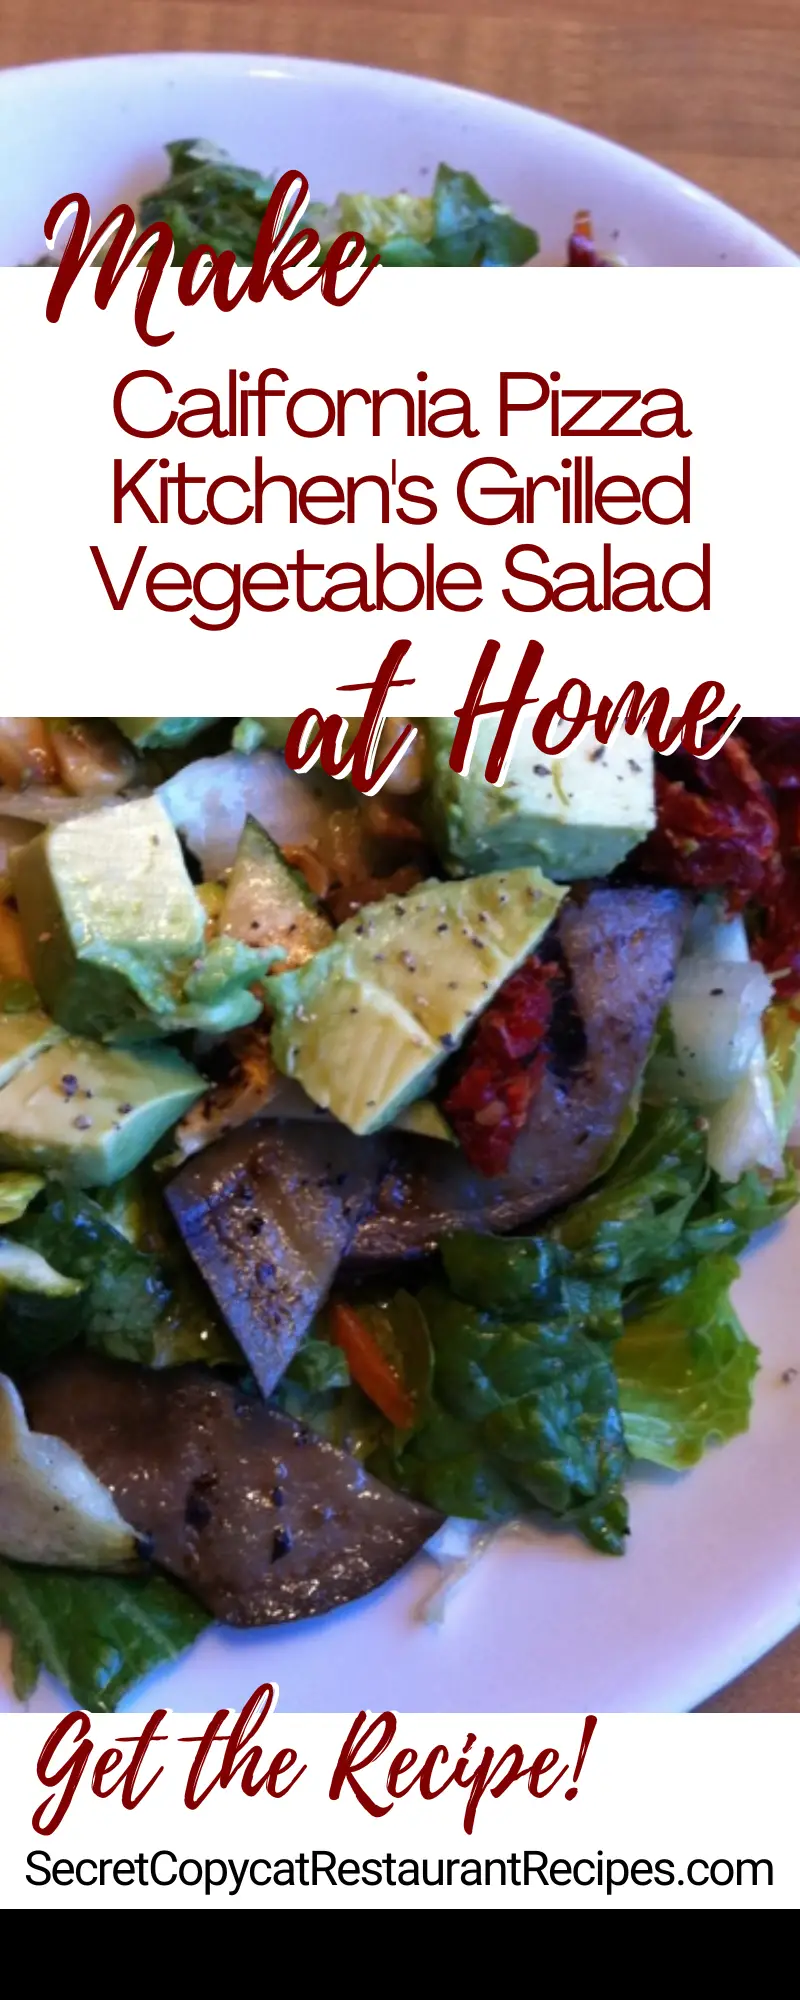 California Pizza Kitchen's Grilled Vegetable Salad Recipe